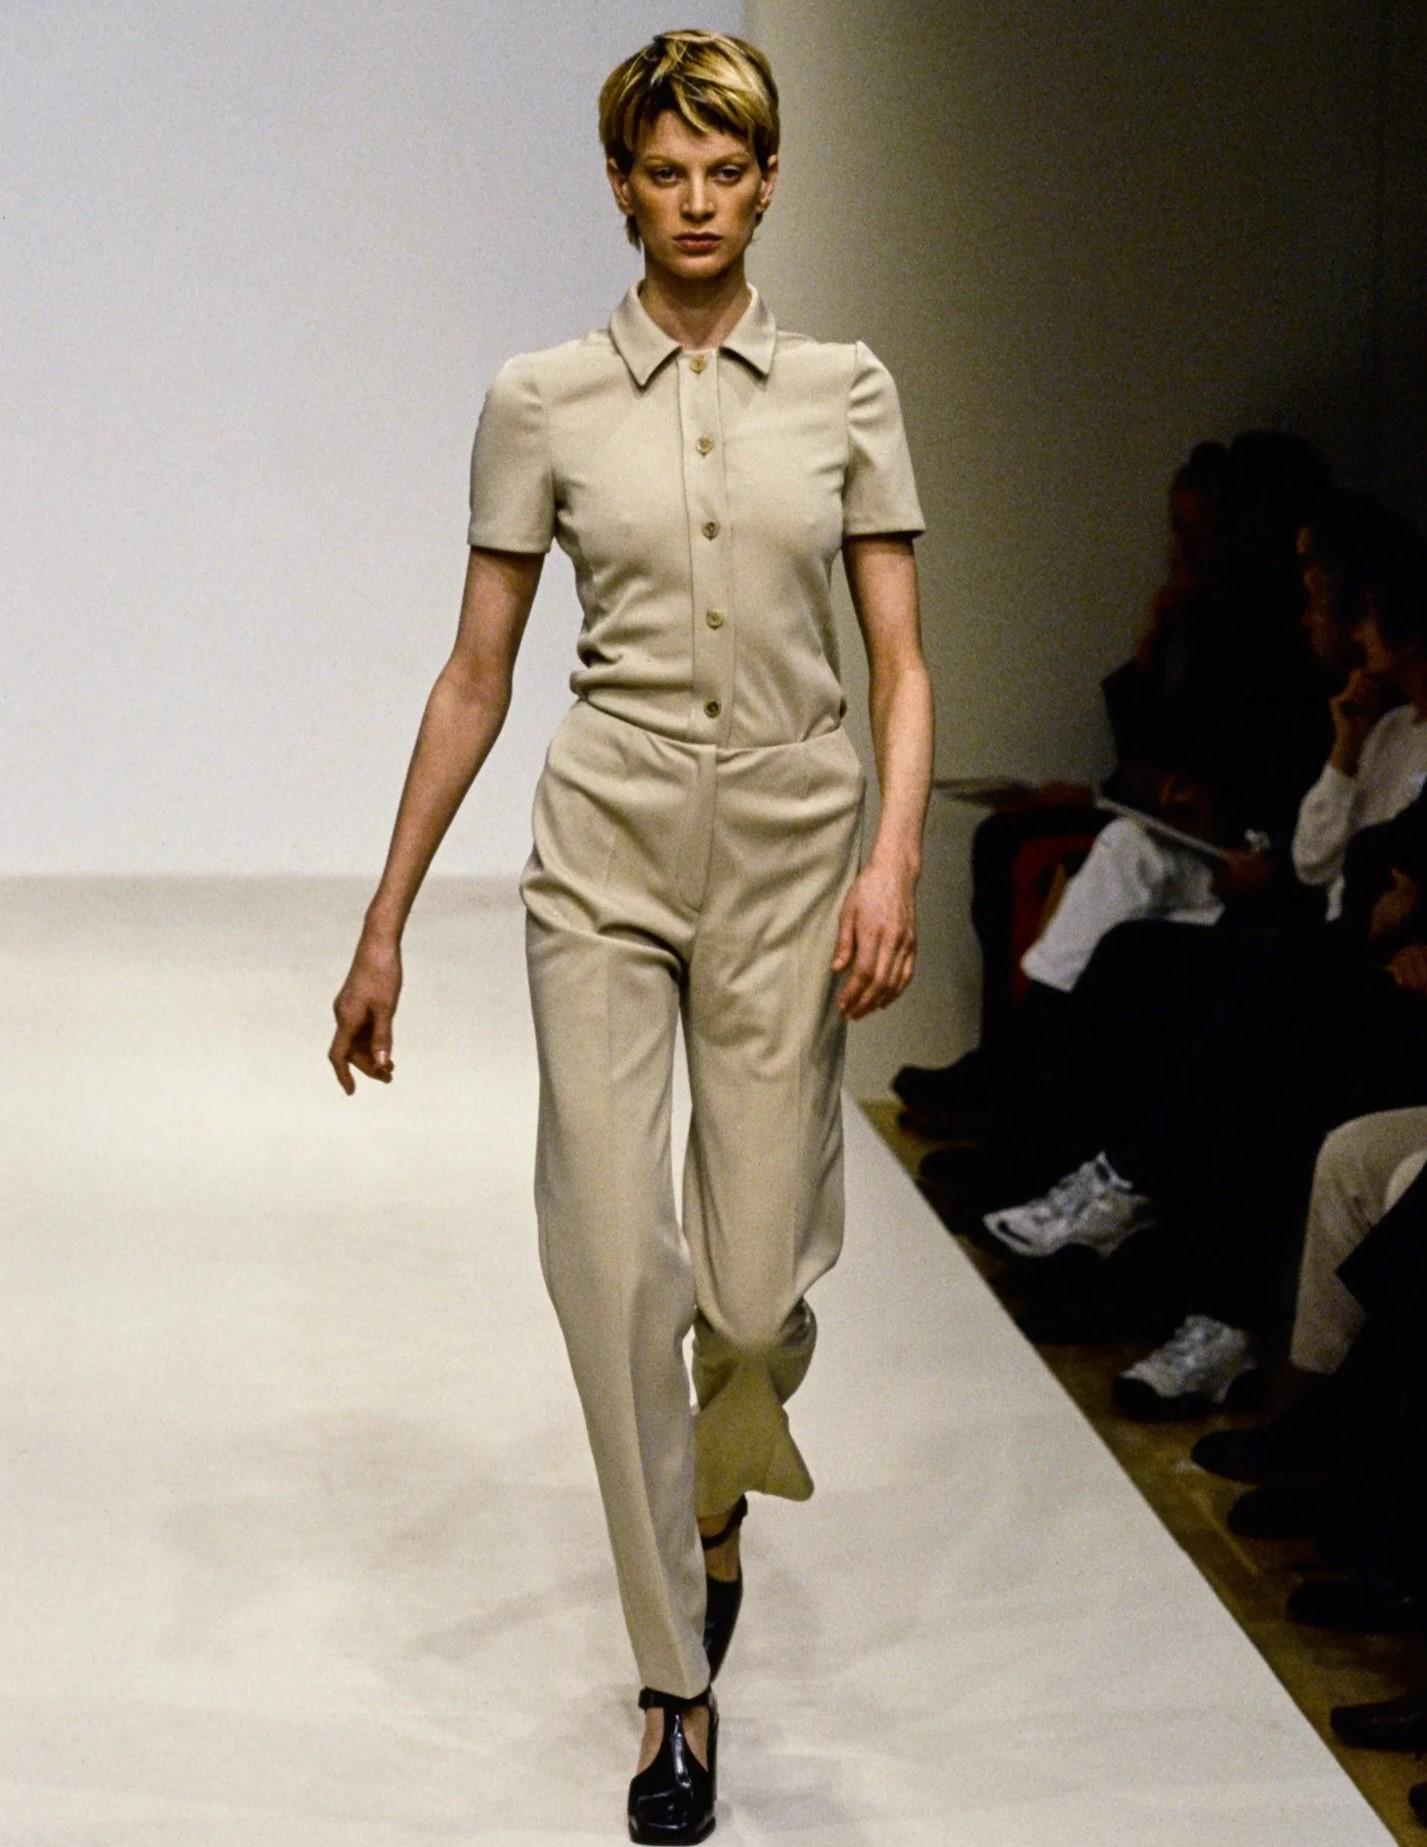 S/S 1996 Prada by Miuccia Prada tan short sleeve pant suit set. Button-up tan shirt and mid-rise straight leg pant set. Buttons are matching tan with subtle tortoiseshell throughout. Fabric Contents are 100% Polyester. As seen on the runway on